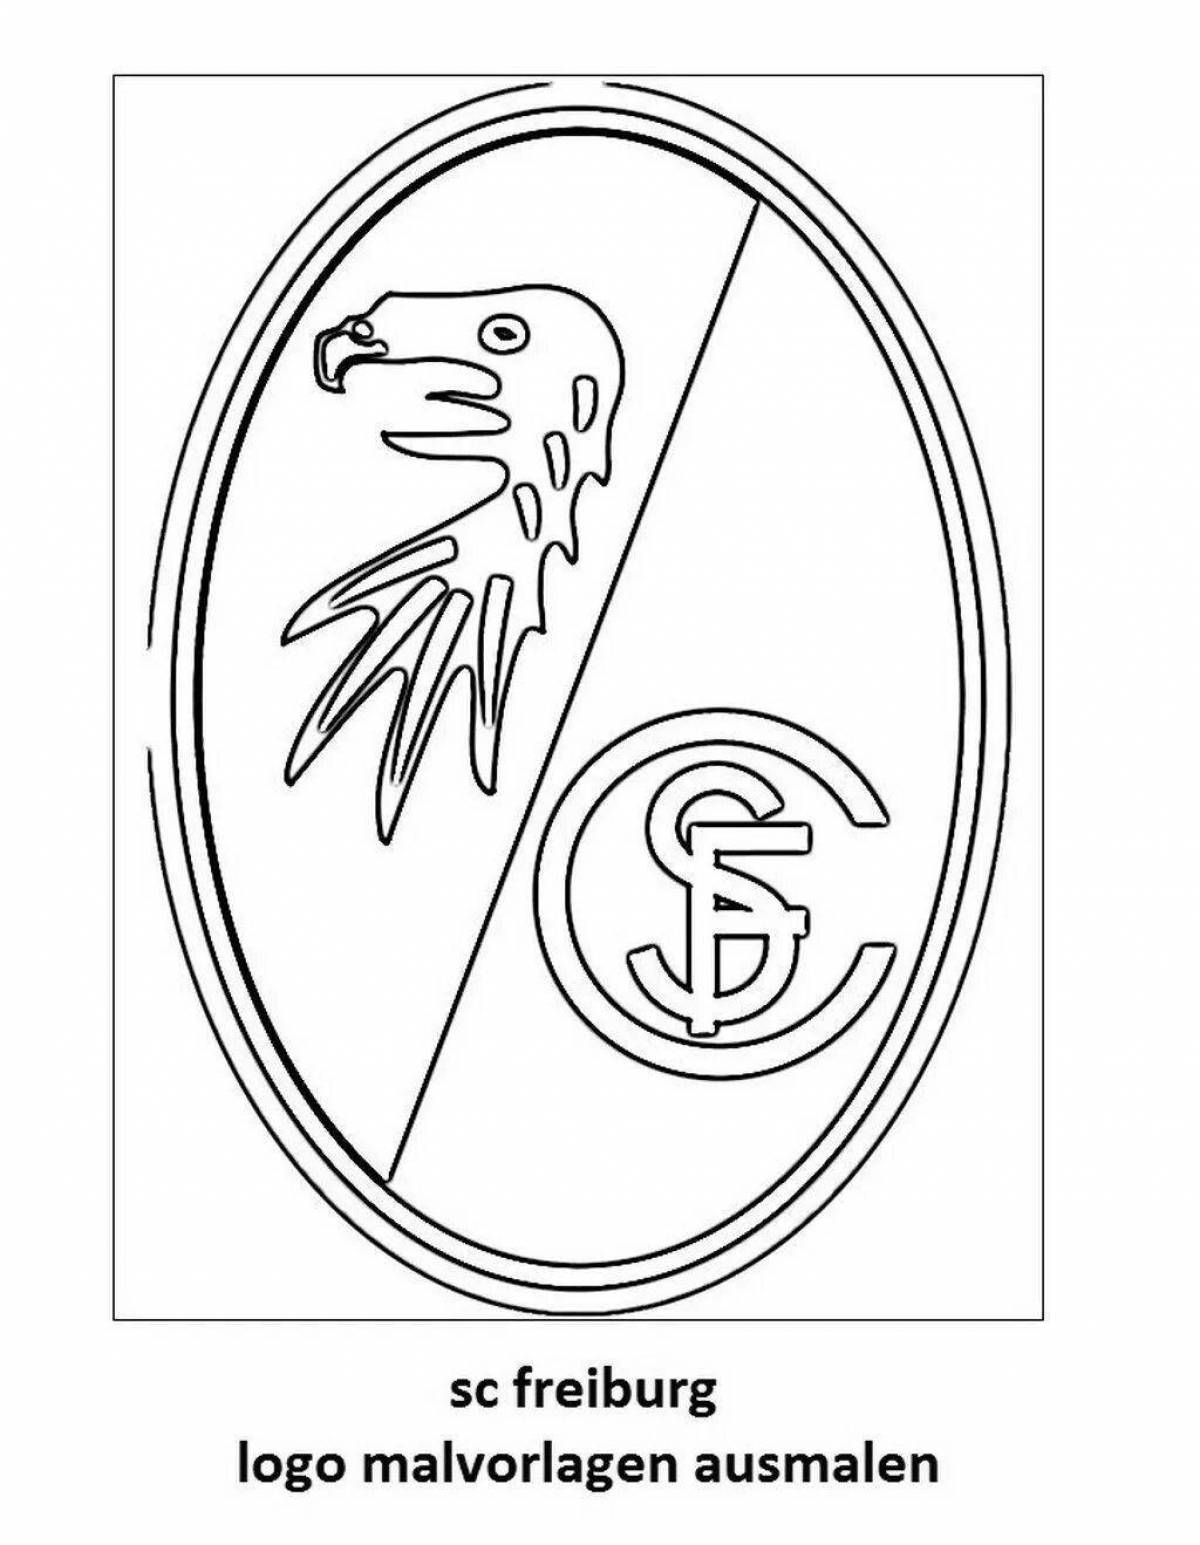 Glamor coloring book with football club logos